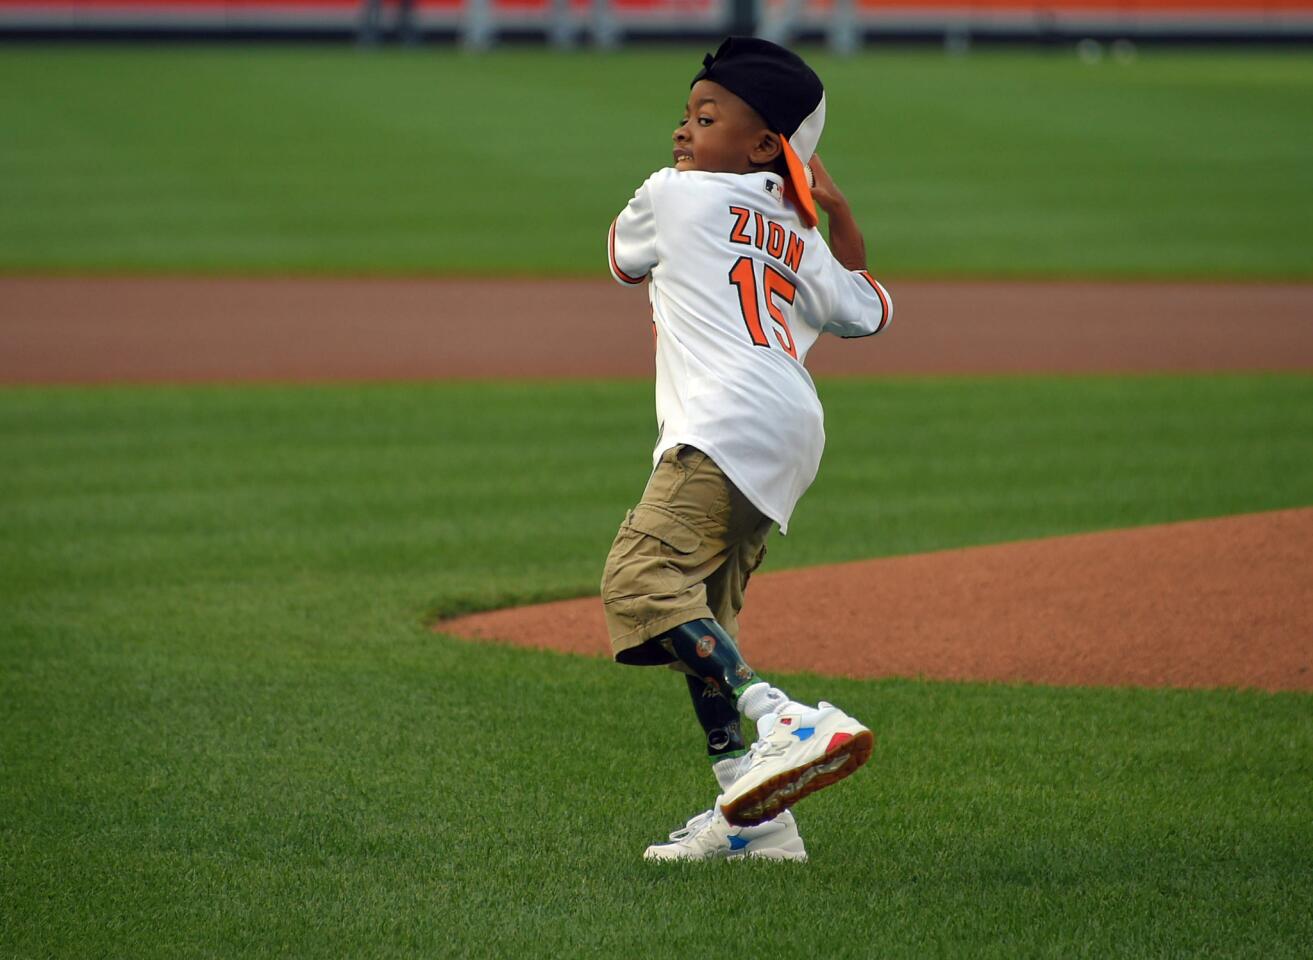 Nine-year-old Zion Harvey of Owings Mills, who has two transplanted hands, throws out the first pitch to Baltimore Orioles center fielder Adam Jones before the game between the Orioles and the Texas Rangers at Oriole Park at Camden Yards on Aug. 2, 2016.